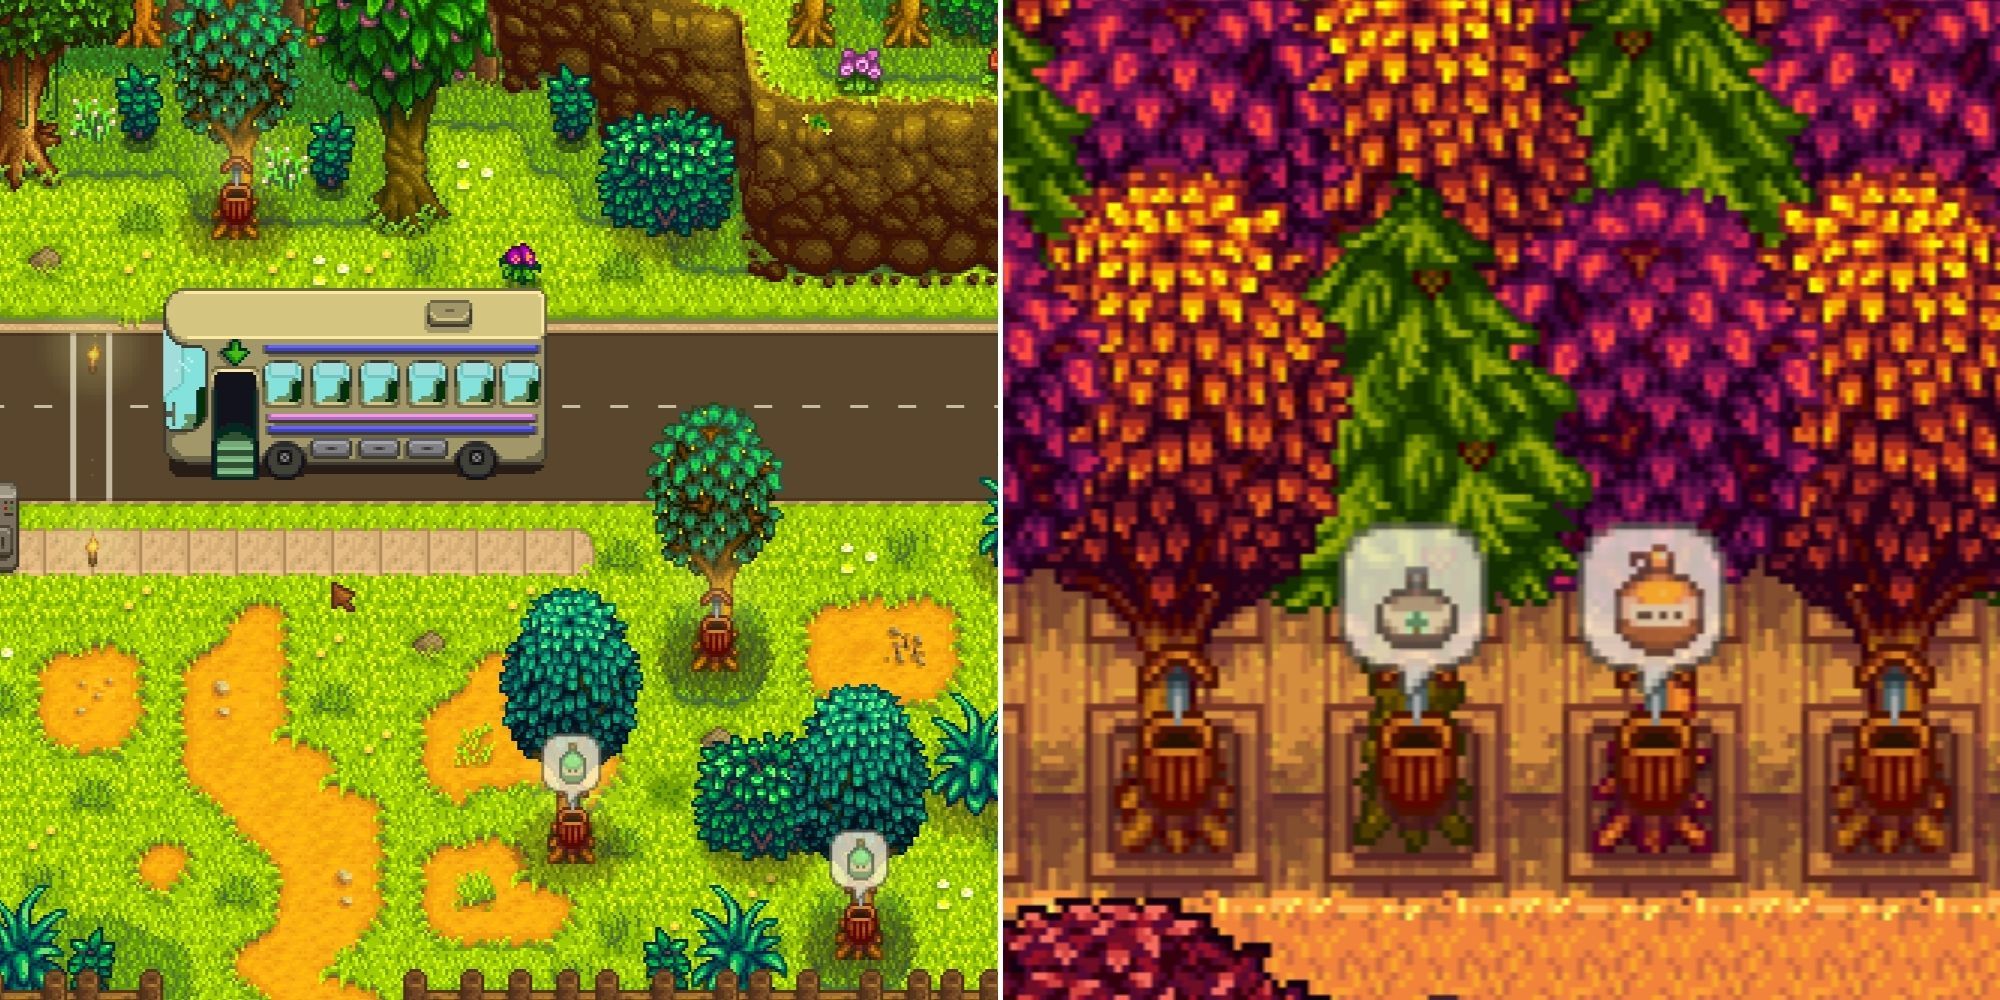 Tappers on the trees near the bus stop and a close up of the tappers ready to be harvested in Stardew Valley